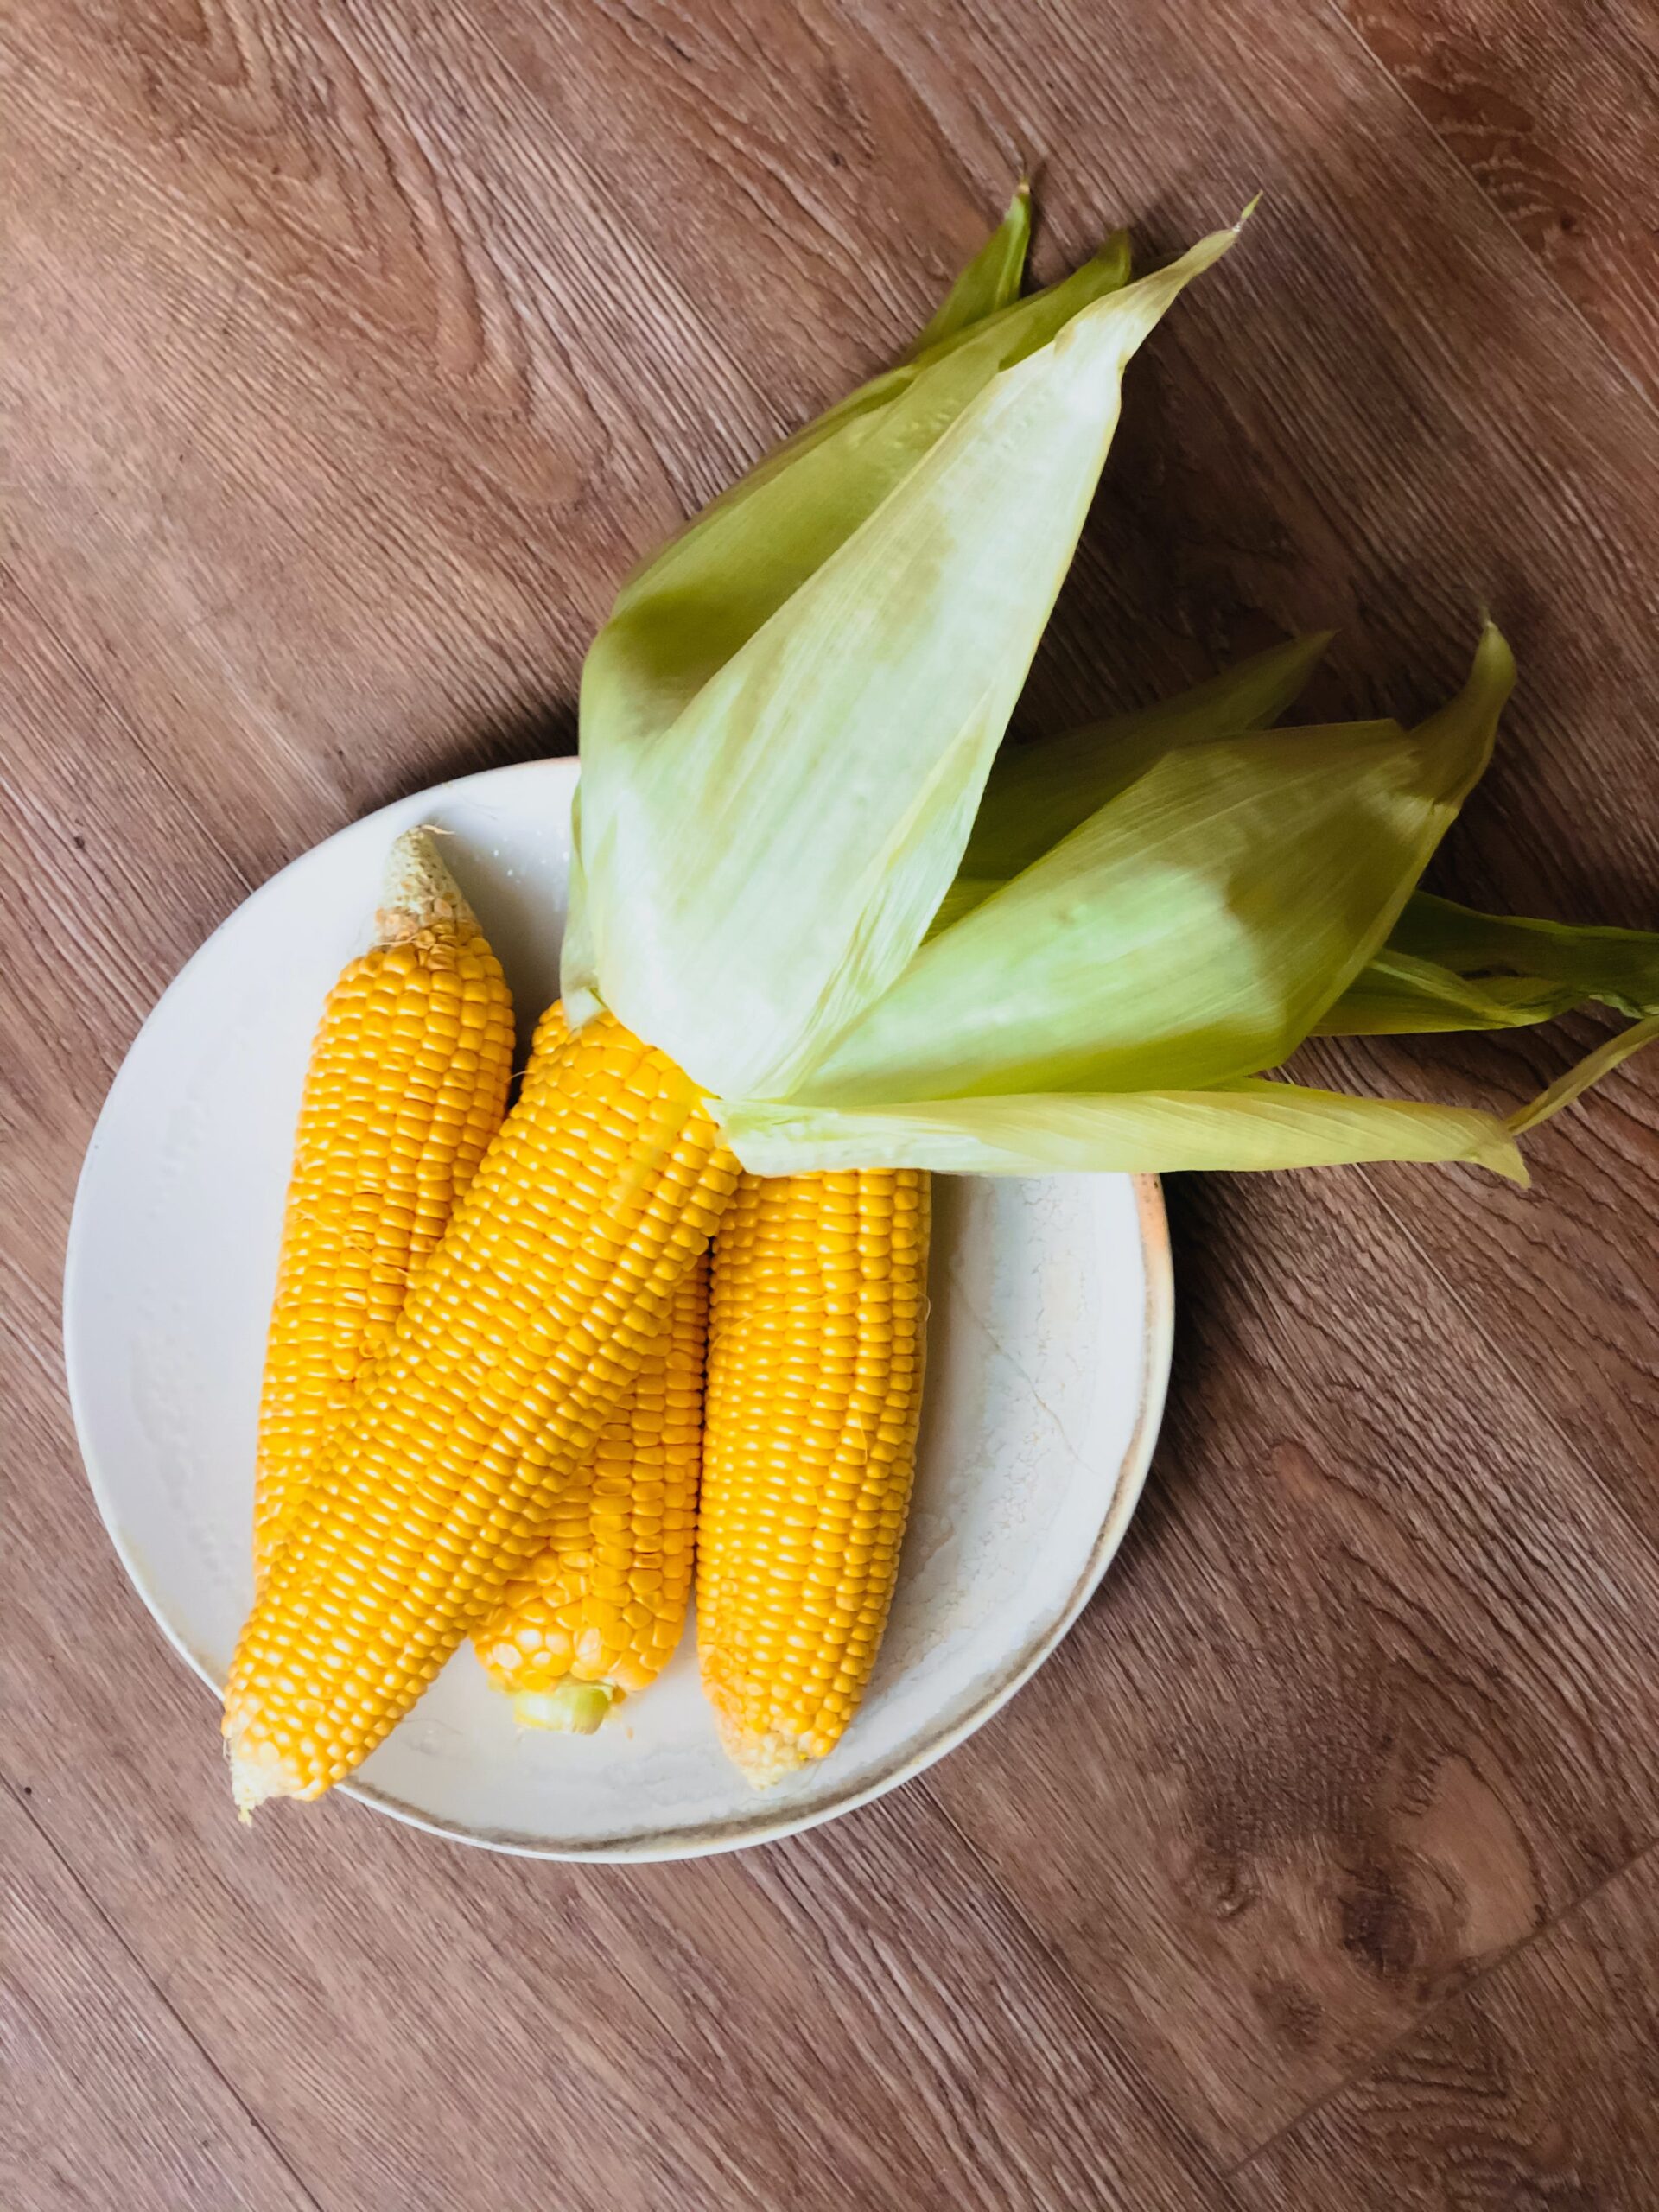 Yellow corn on the cob on a plate